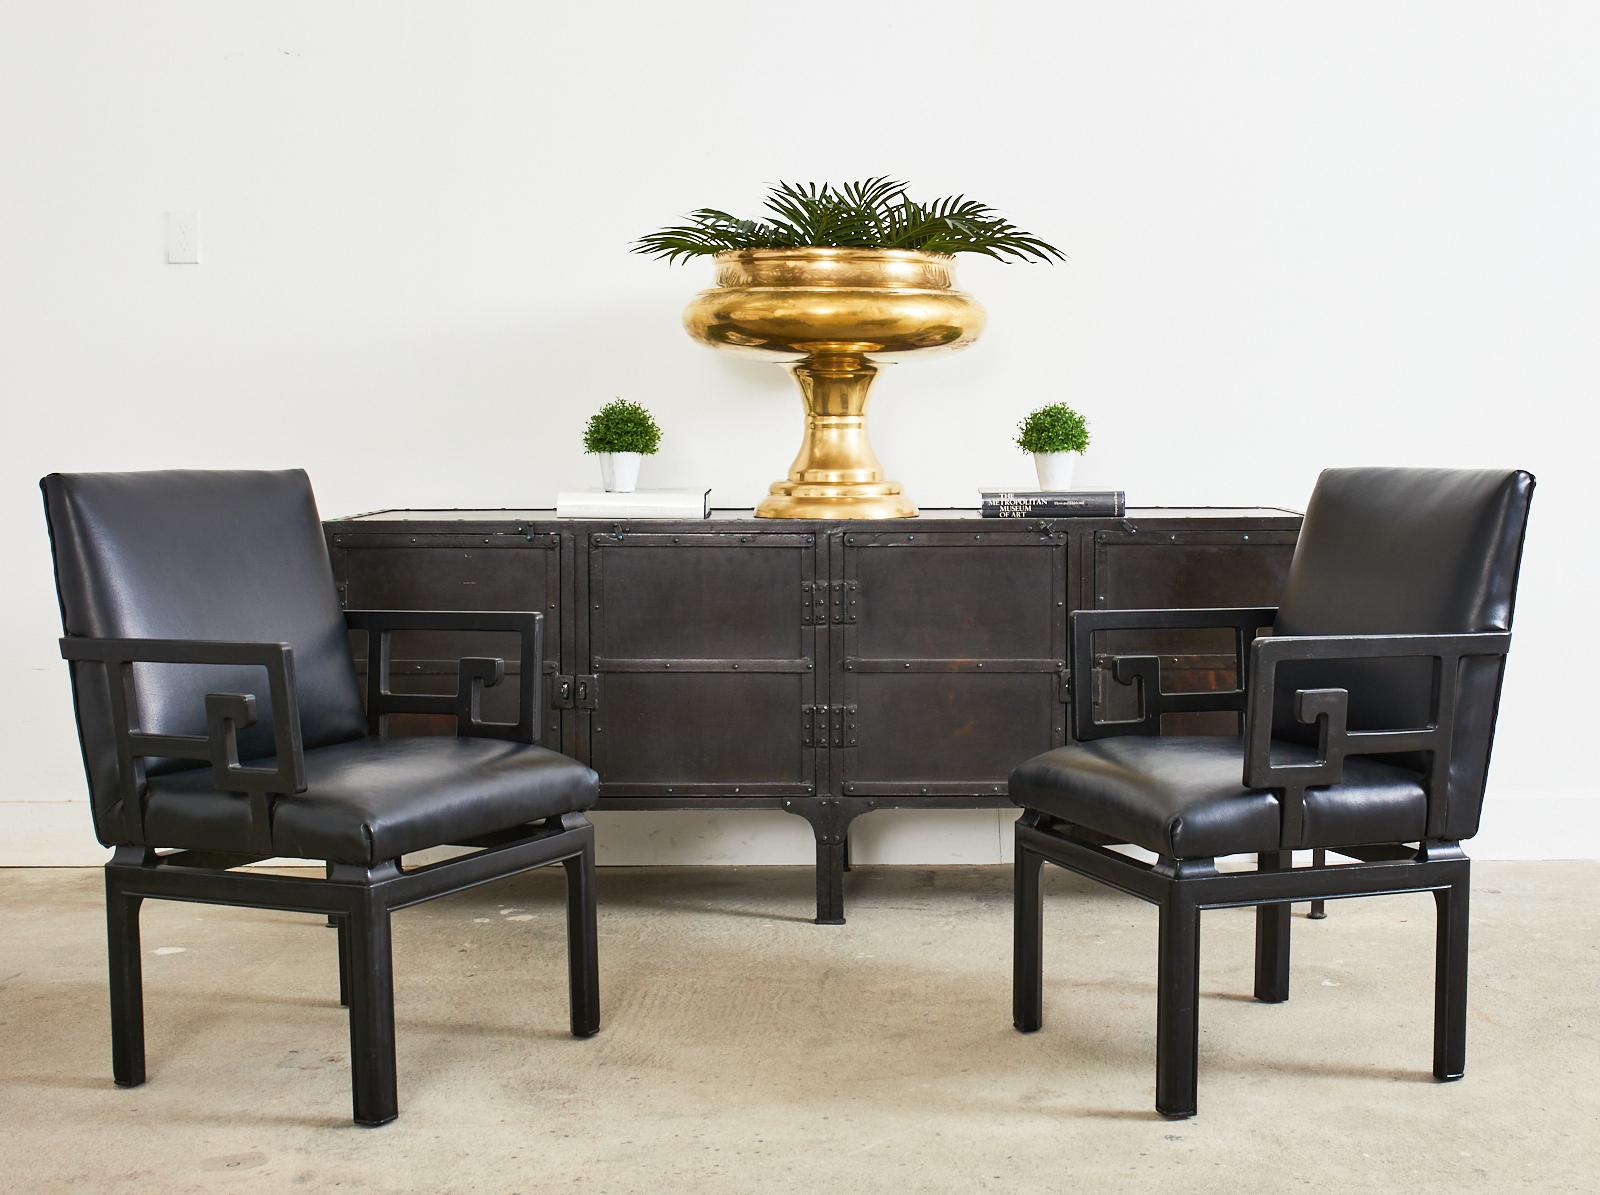 Rare Mid-Century Modern pair of Greek key armchairs designed by Michael Taylor for Baker Far East Collection. The chairs feature a hardwood frame with a black lacquered ebonized finish. The decorative arms have a large greek key motif. Generous